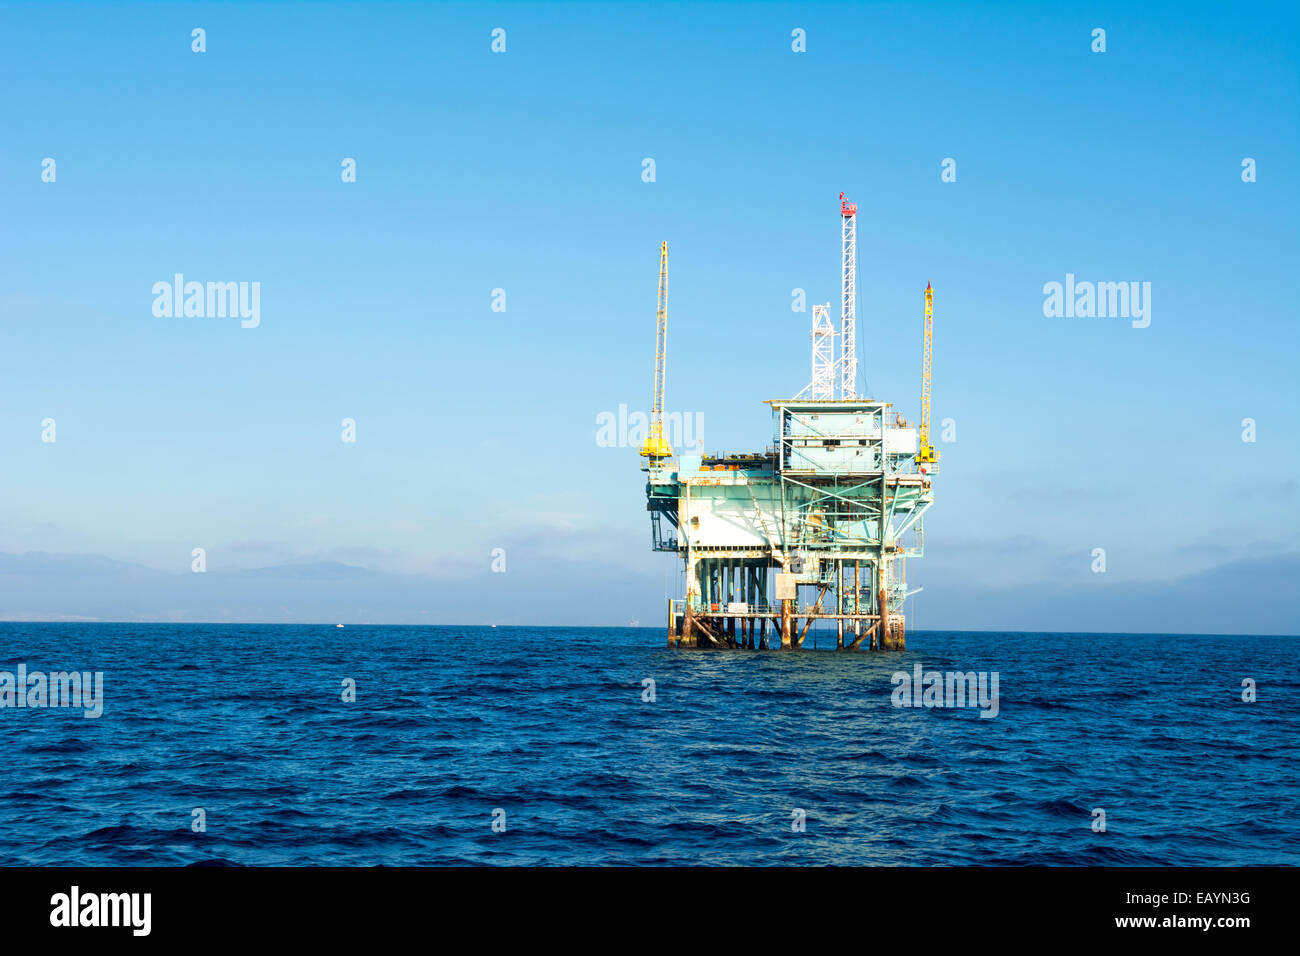 An offshore oil platform rests in deep ocean water on a clear, bright, sunny day. Stock Photo